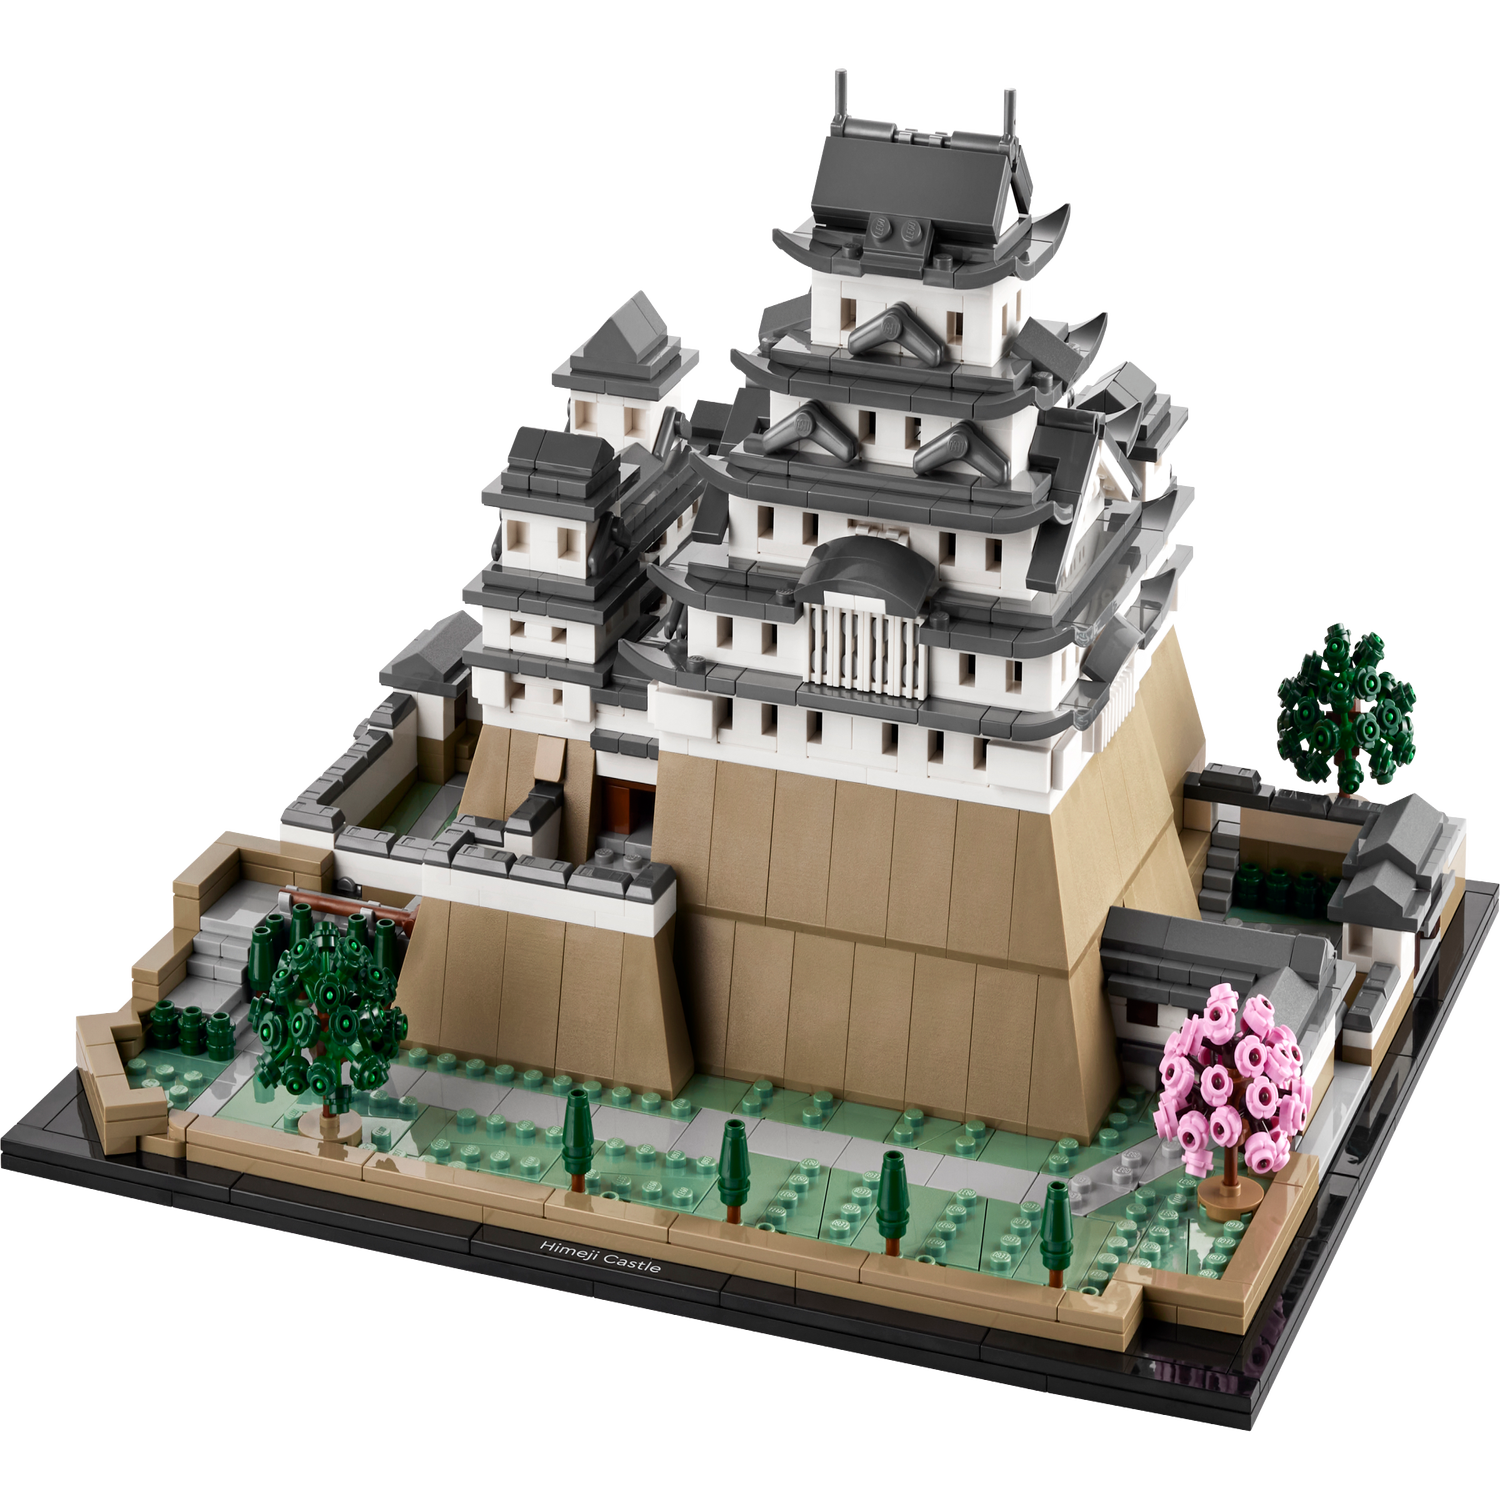 Himeji Castle 21060 Architecture Buy online at the Official LEGO